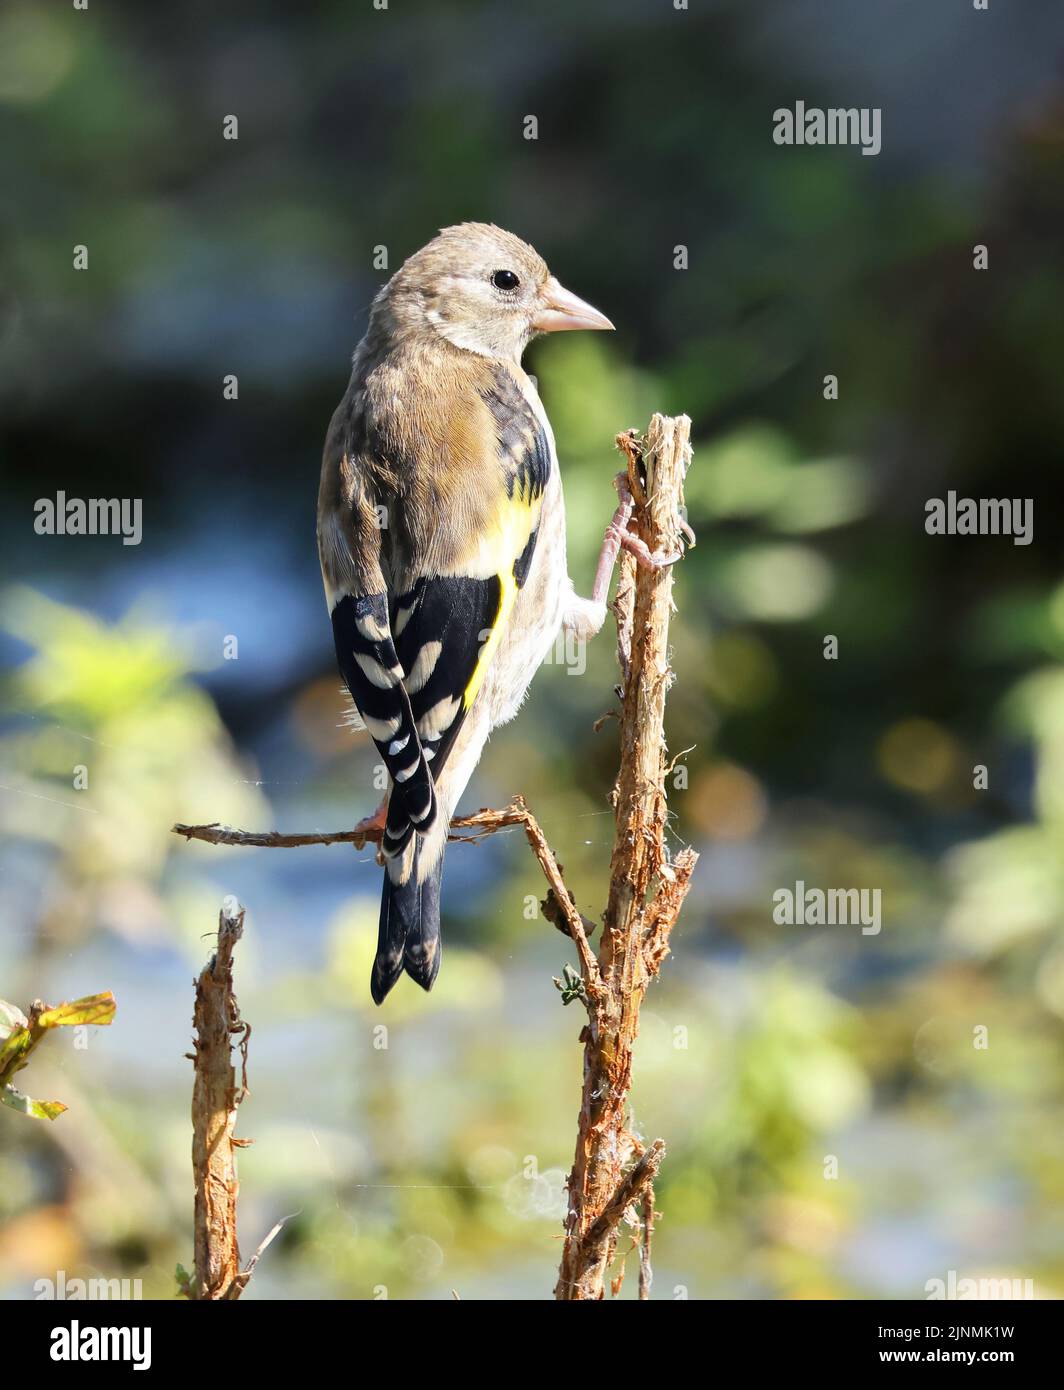 A juvenile Goldfinch perched on a plant stem Stock Photo